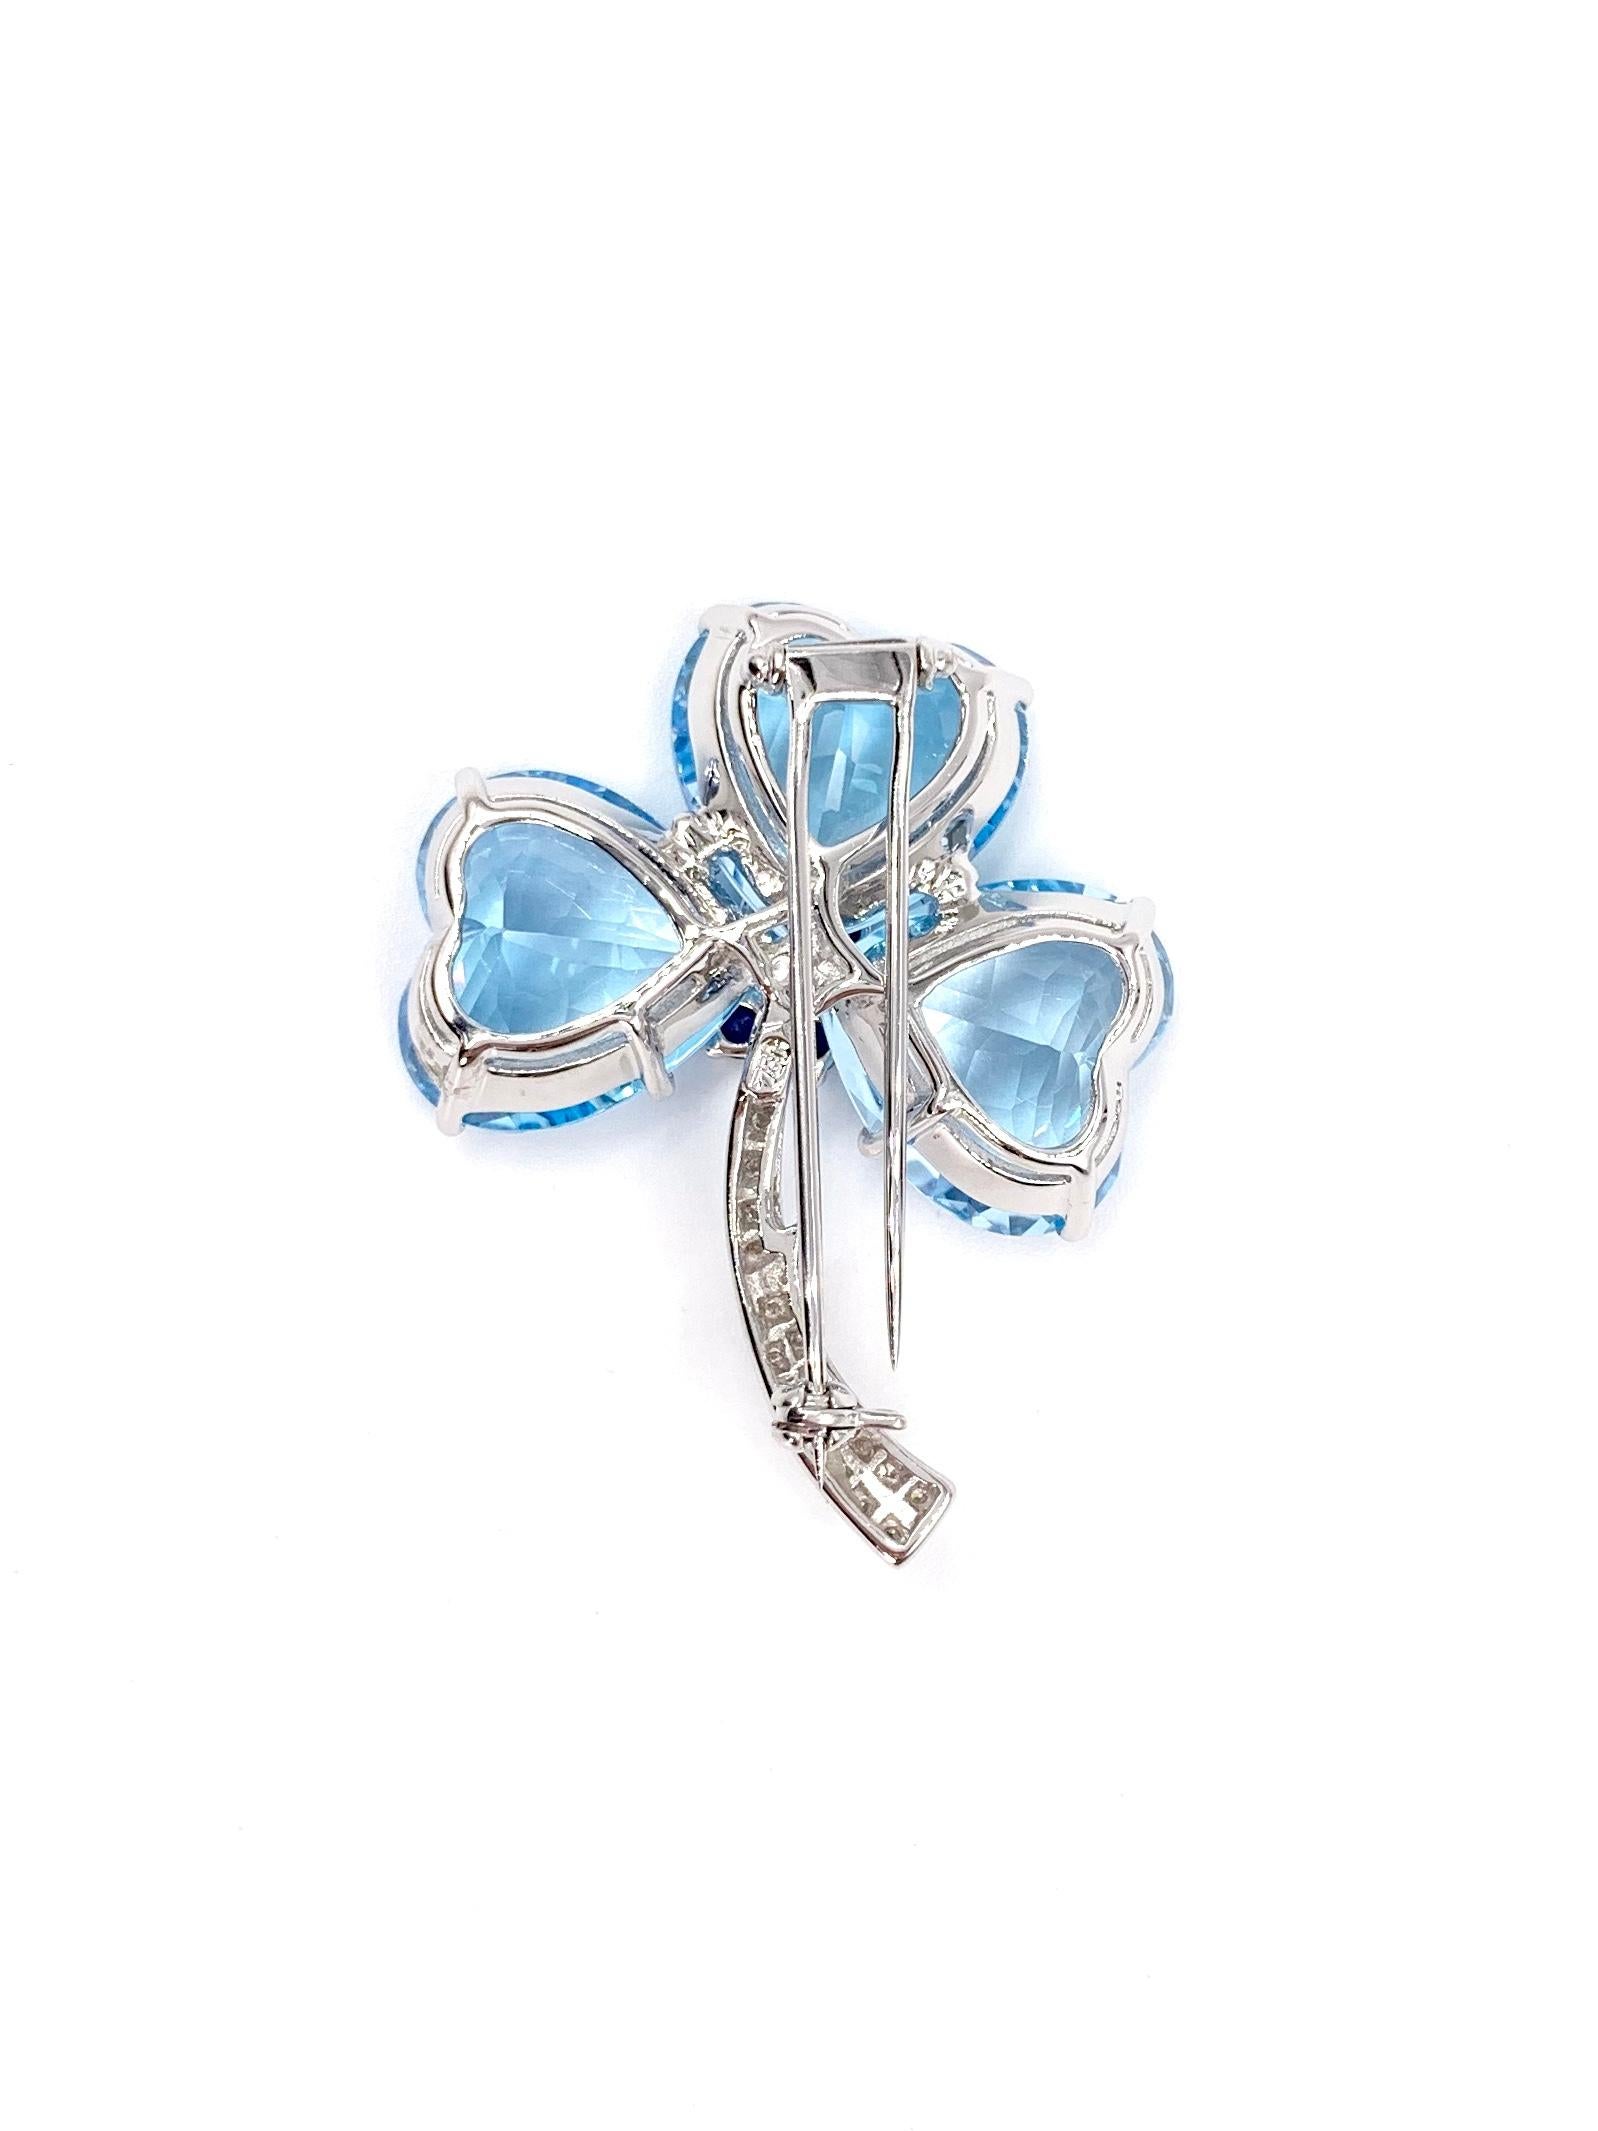 Blue Topaz, Sapphire and Diamond 18 Karat White Gold Clover Brooch In Excellent Condition For Sale In Pikesville, MD